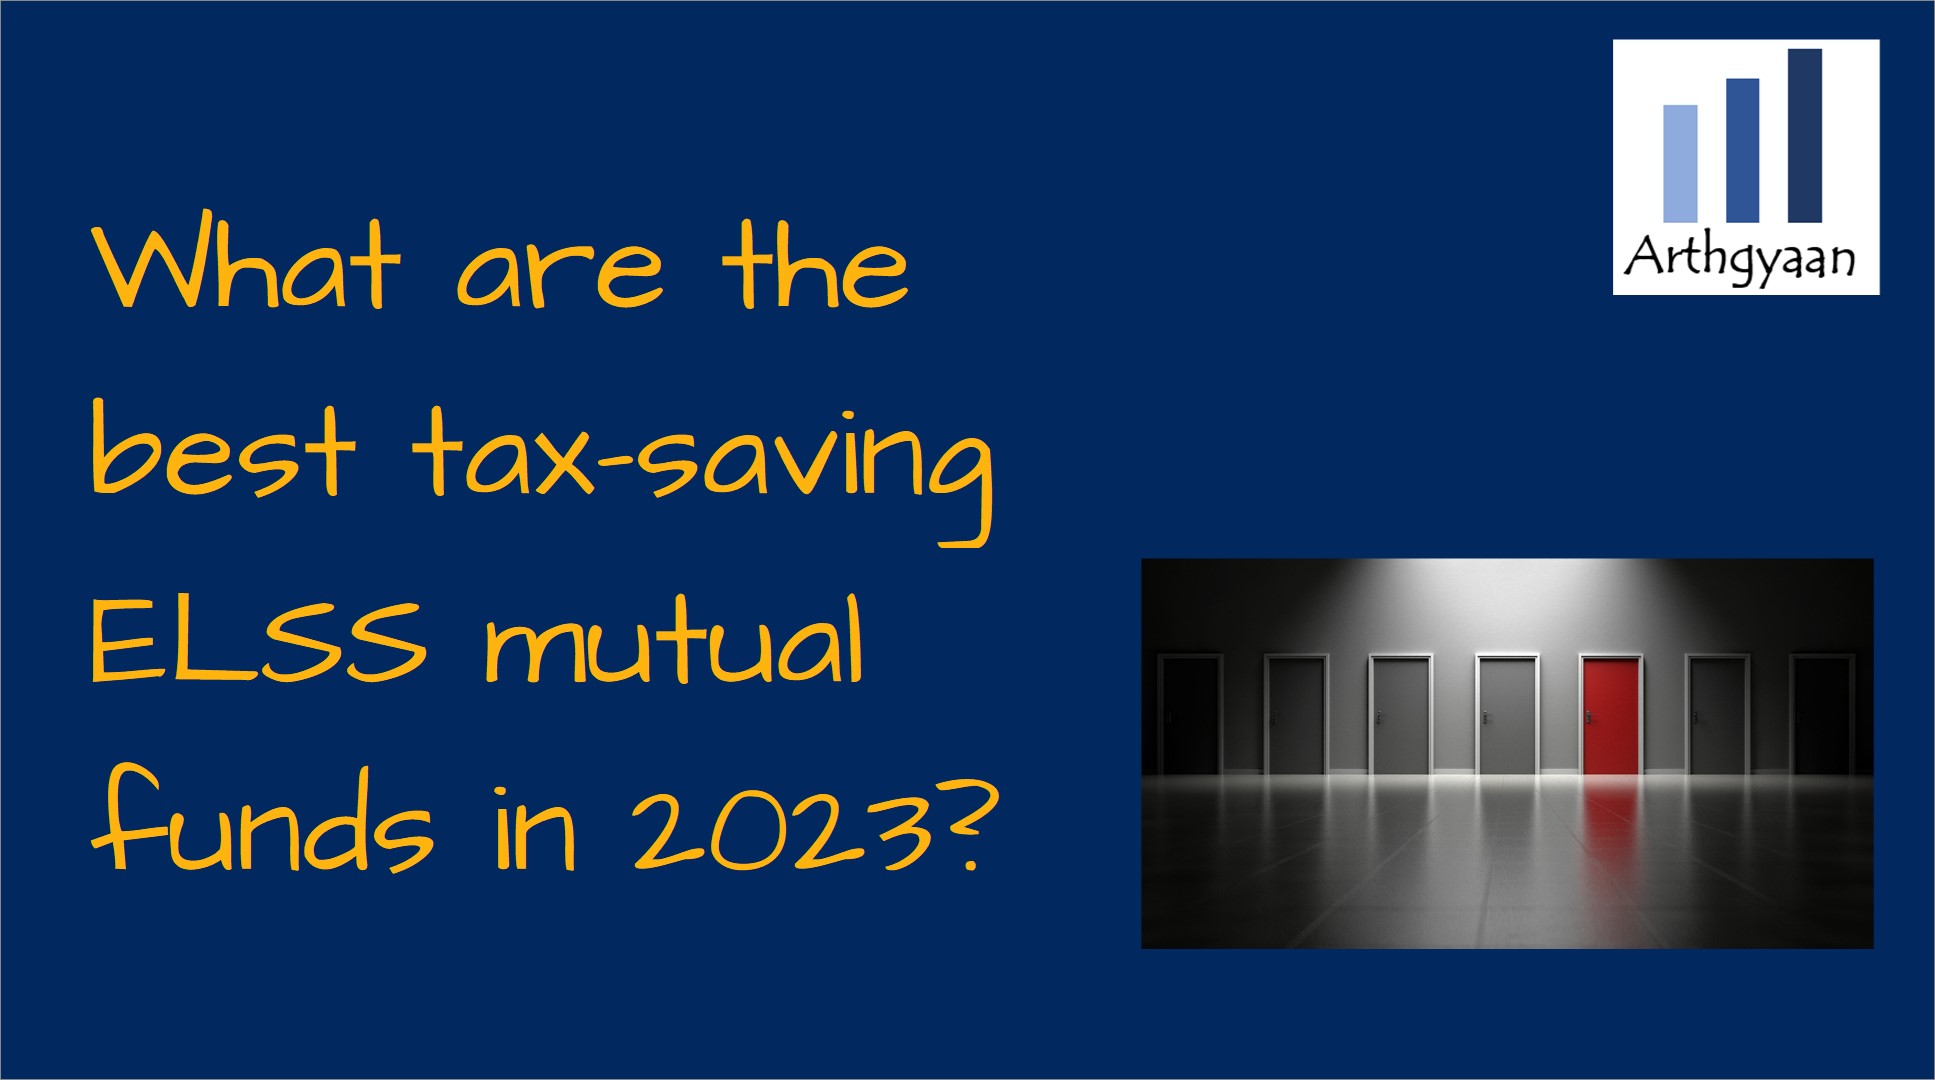 What are the best tax-saving ELSS mutual funds in 2023?